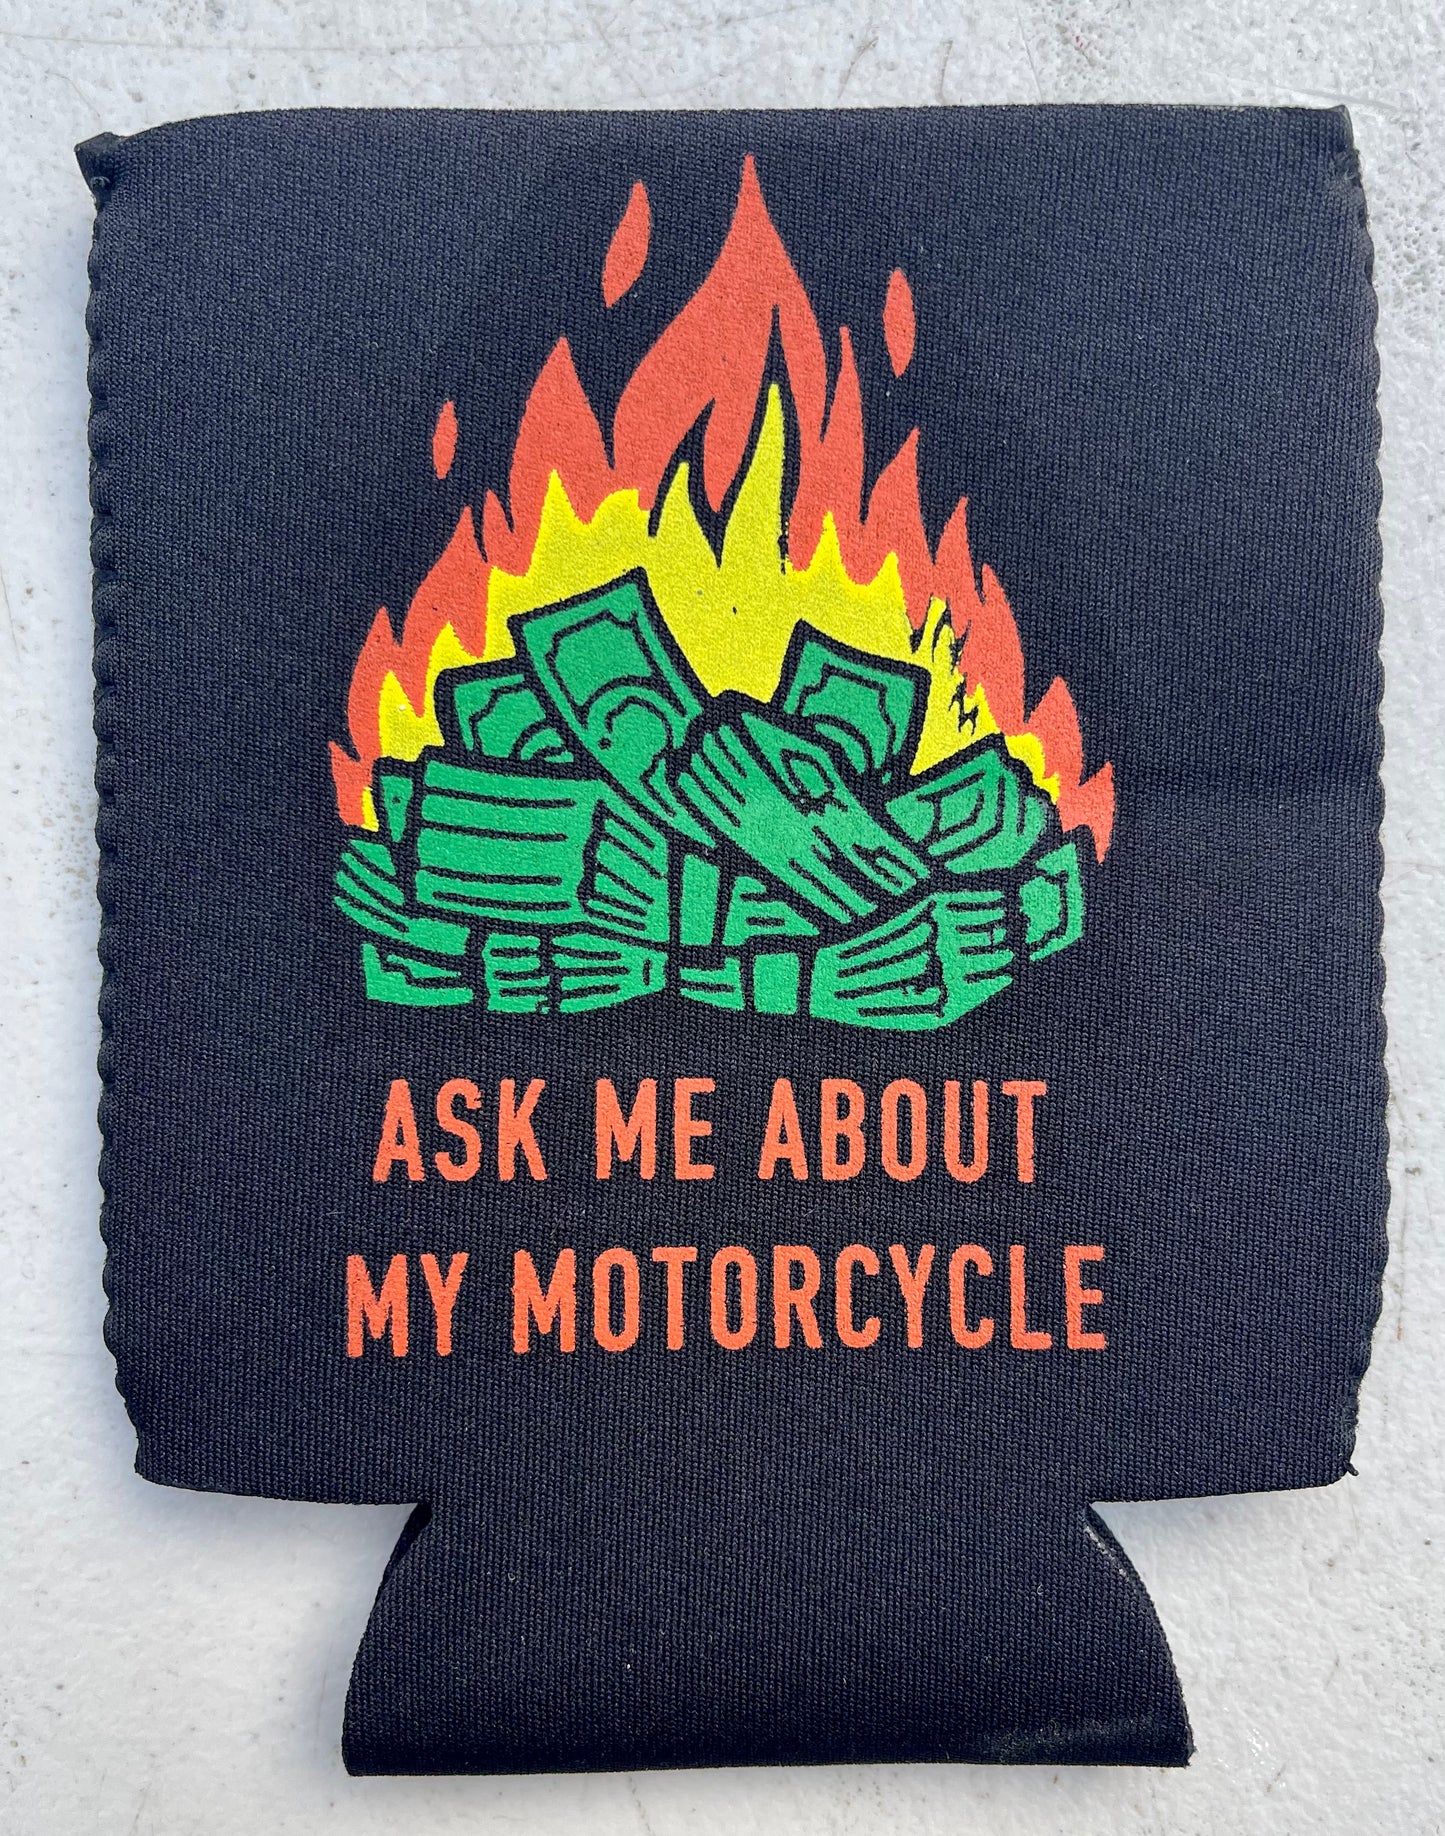 ASK ME ABOUT MY MOTORCYCLE - KOOZIE